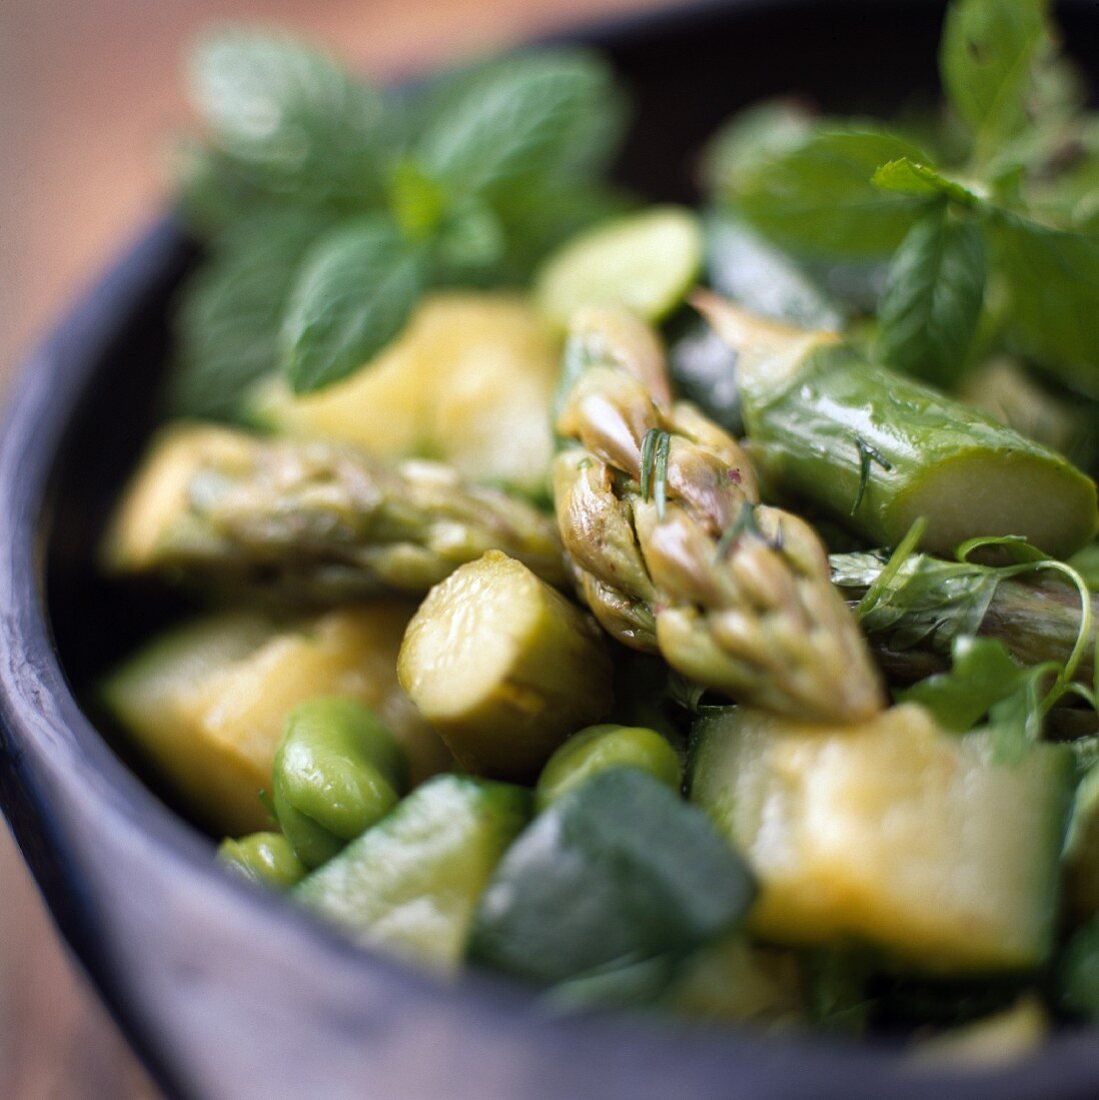 Green Asparagus and Zucchini Salad with Mint